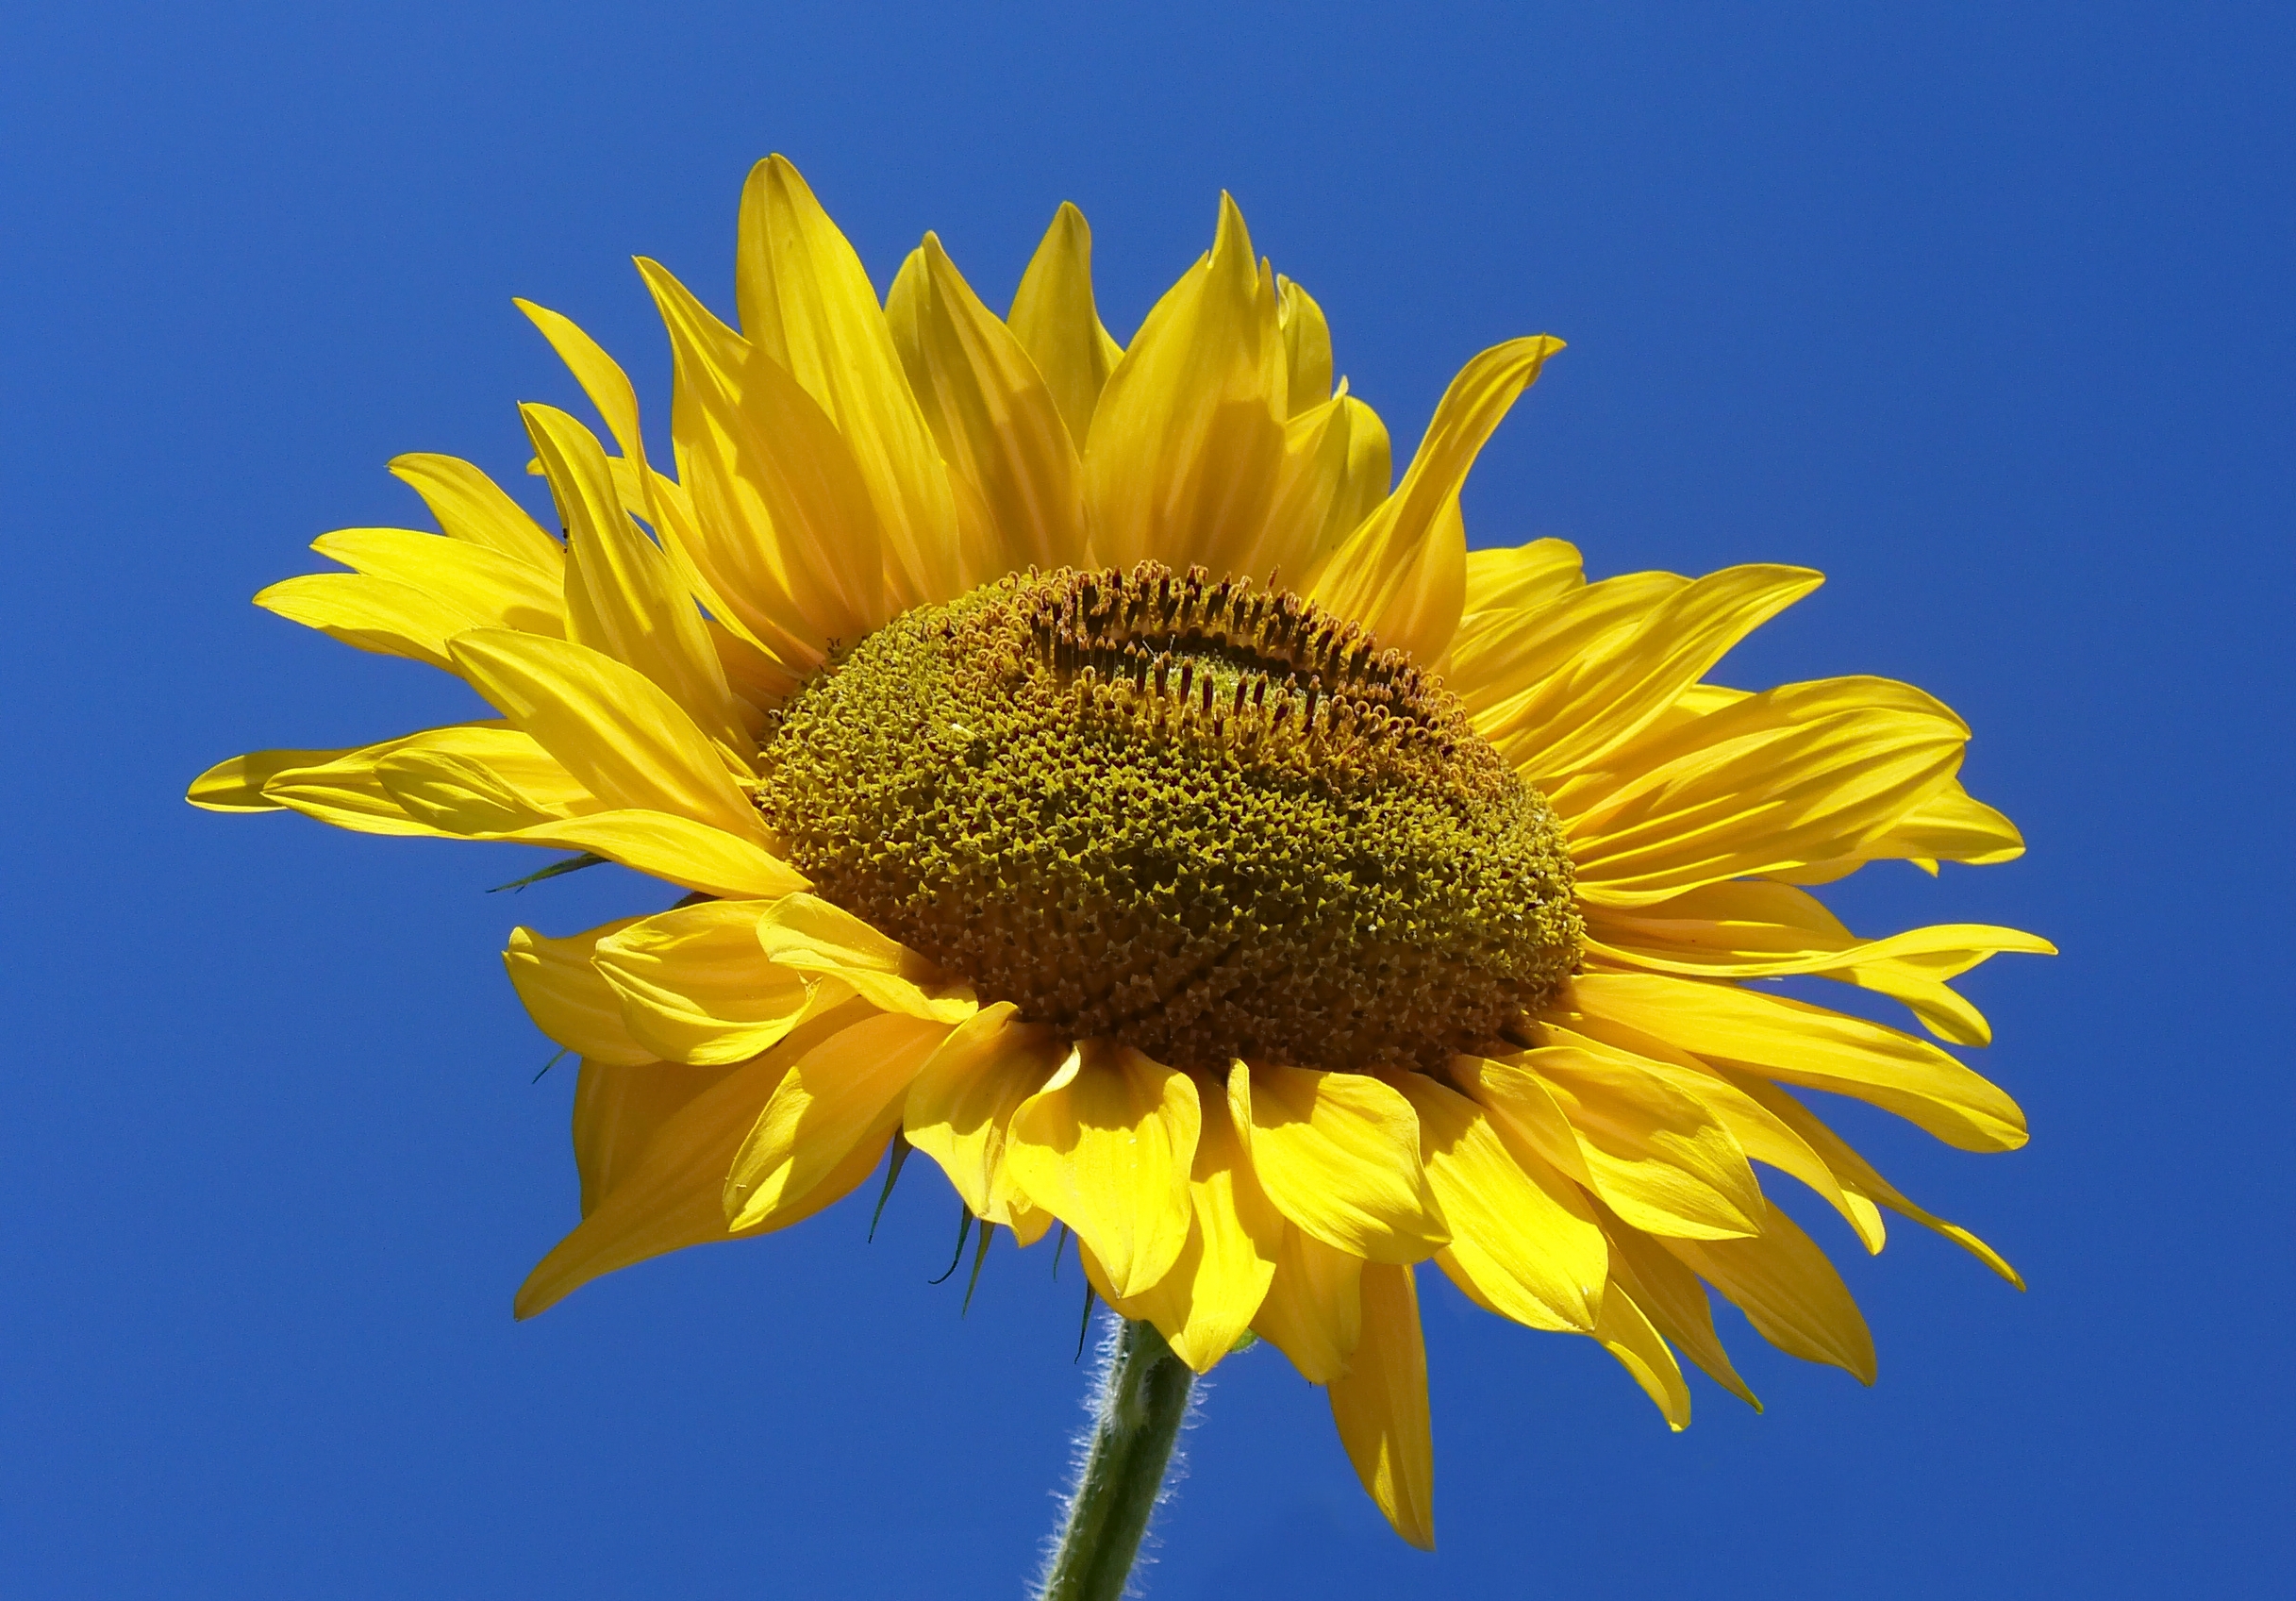 This is a picture of a Sunflower.